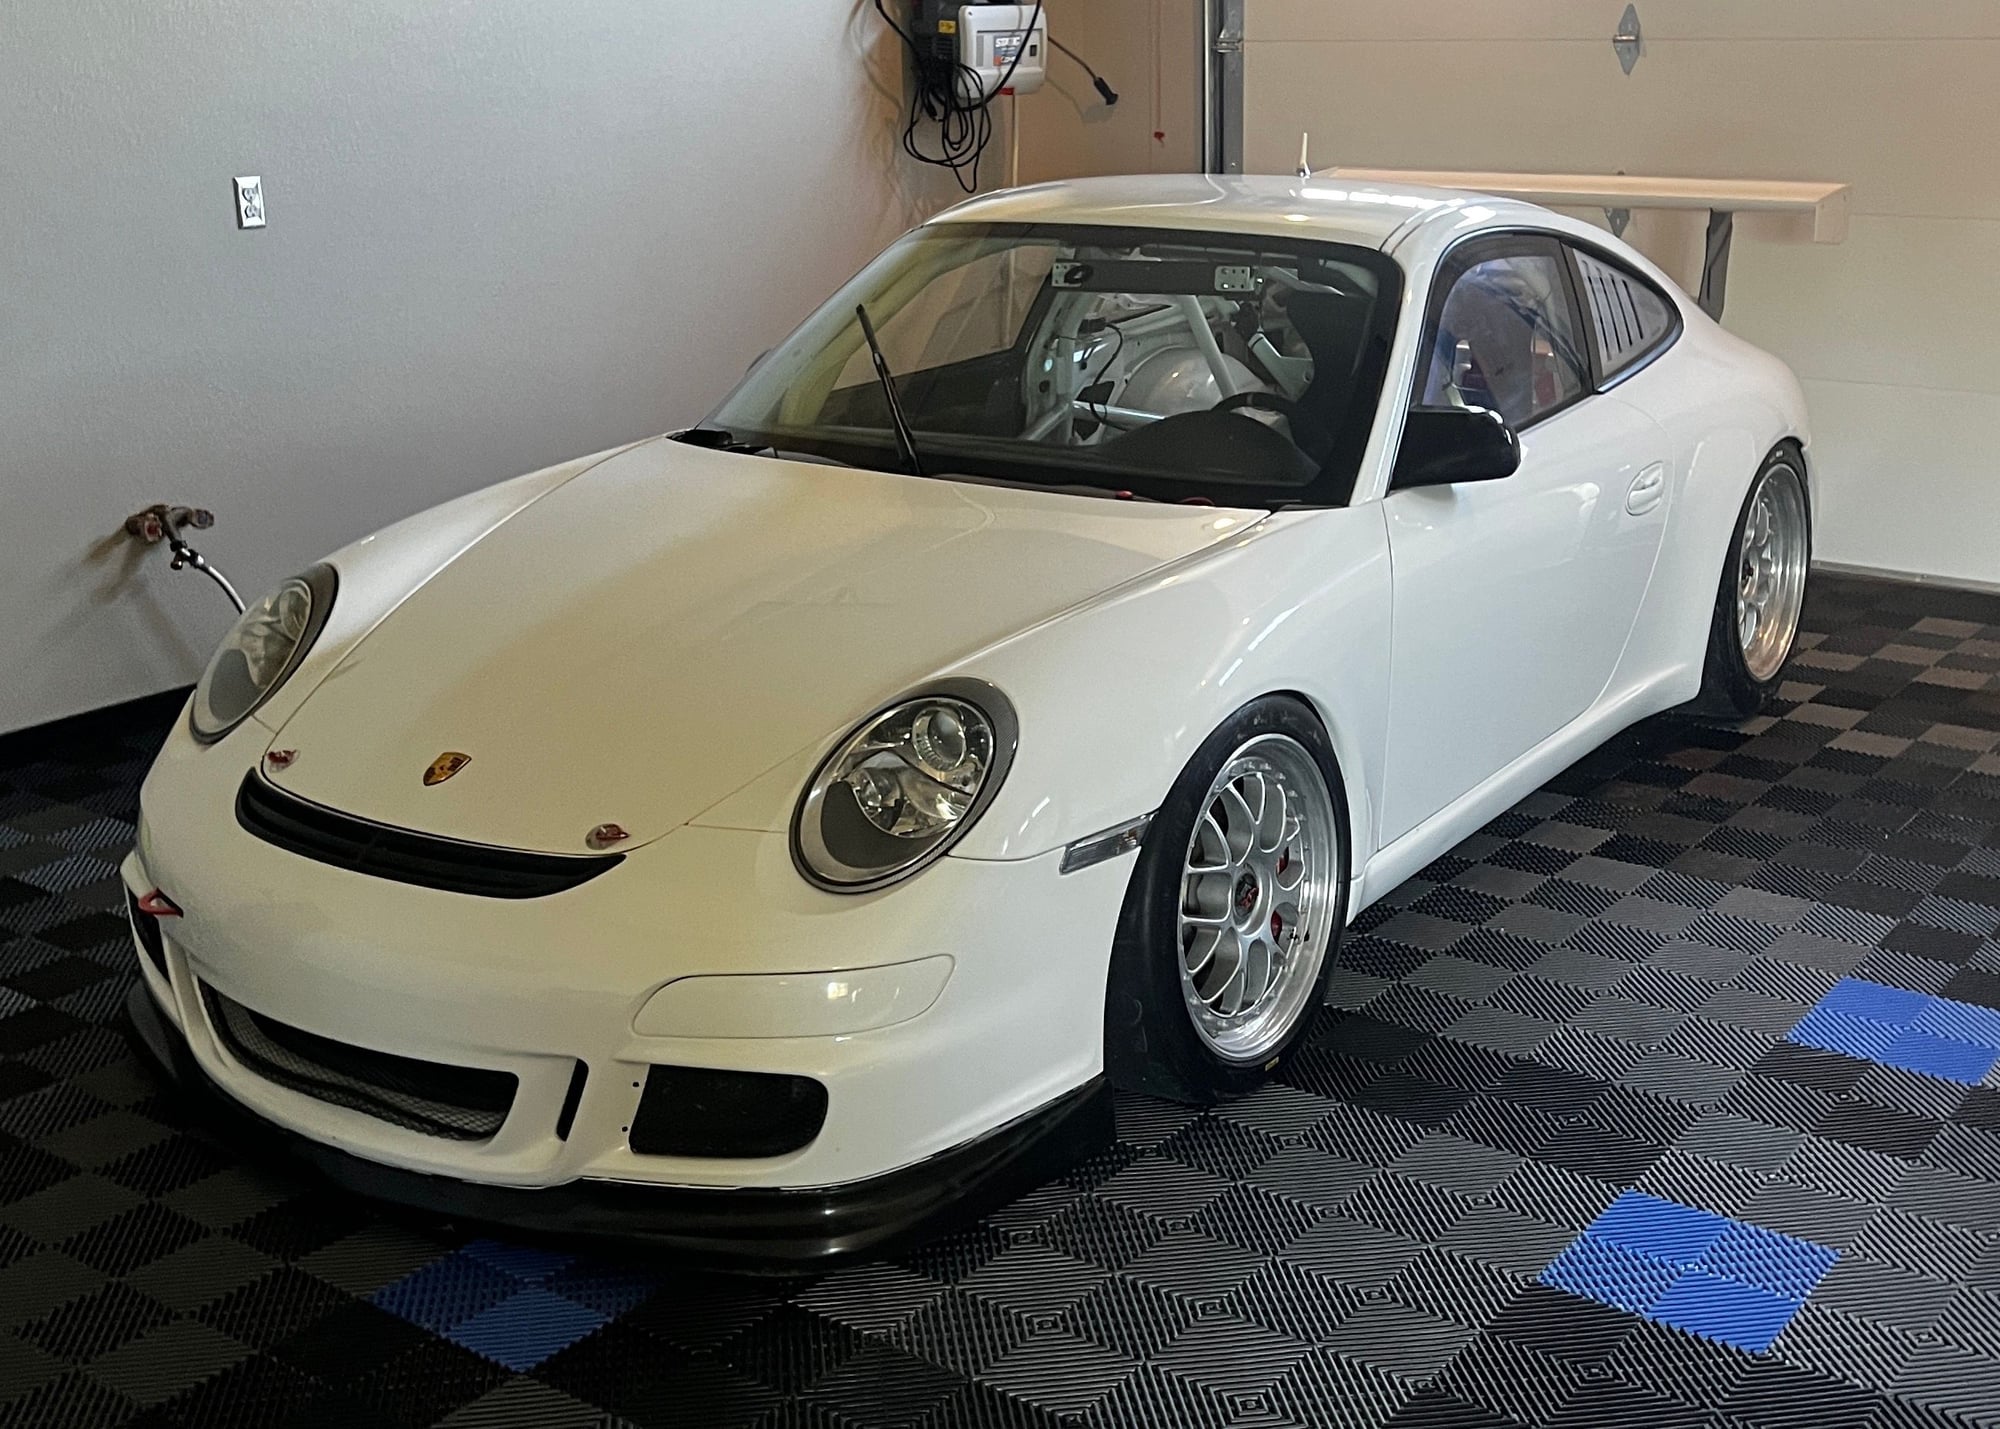 2007 Porsche GT3 - 2007 Porsche 911 GT3 Cup 997.1 Factory Race Car, Original 58hrs - Used - VIN WP0ZZZ99Z7S111111 - 3,075 Miles - 6 cyl - 2WD - Manual - Coupe - White - Southern Mn, MN 55111, United States